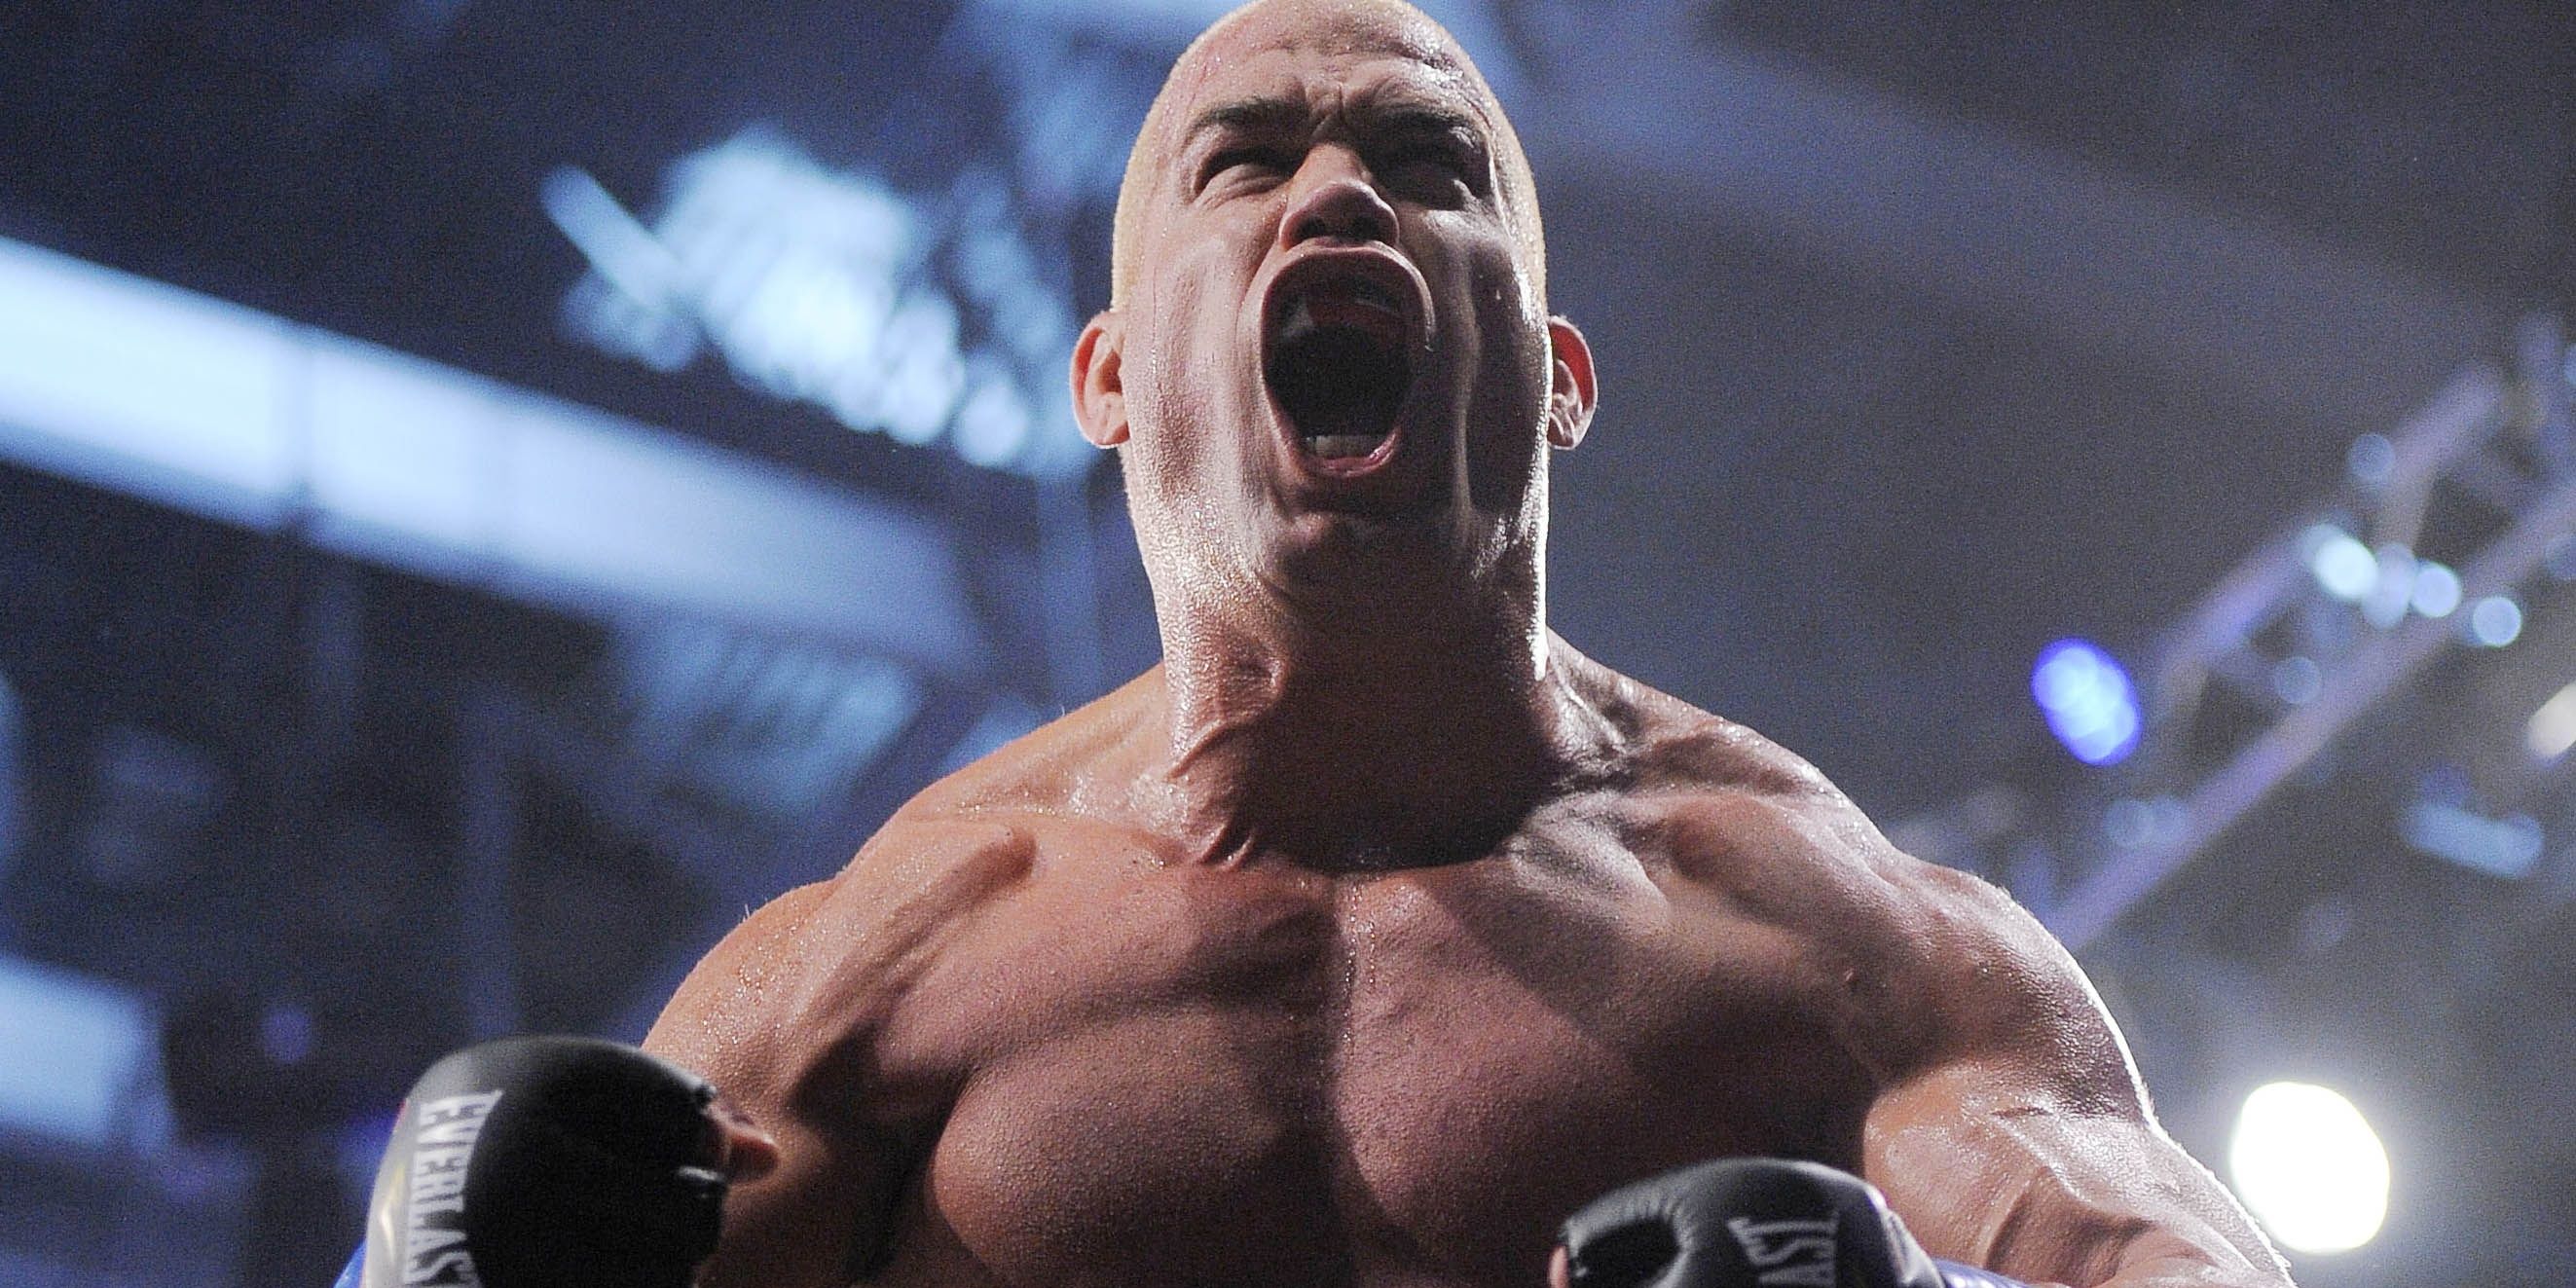 tito-ortiz-flexing-on-top-of-cage